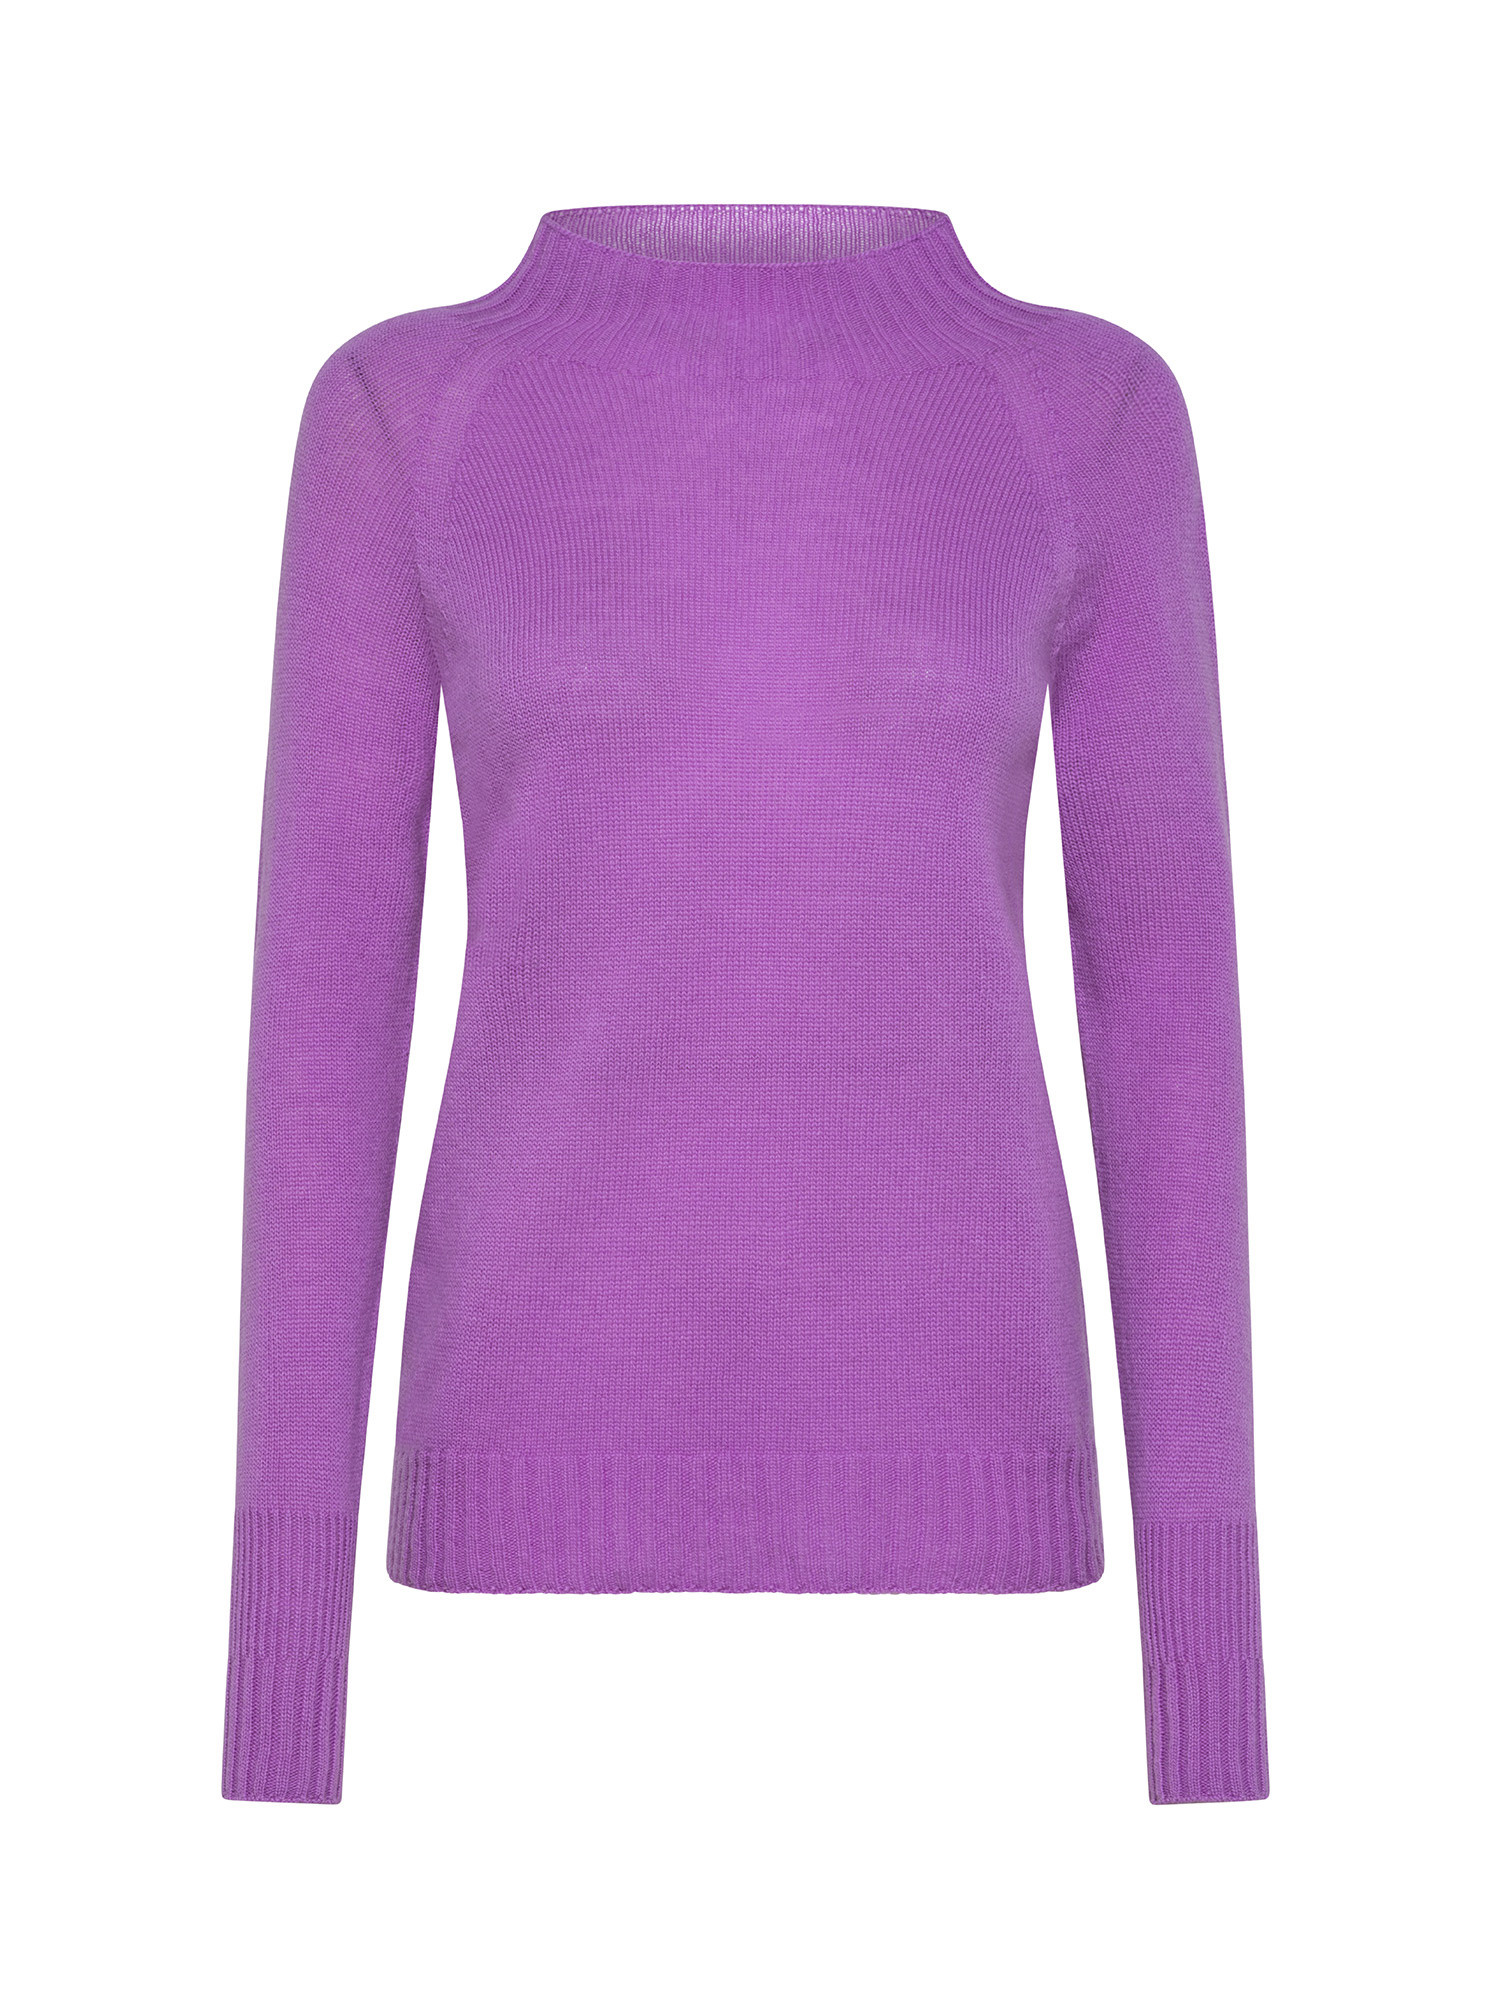 K Collection - Crater neck sweater, Purple Lilac, large image number 0